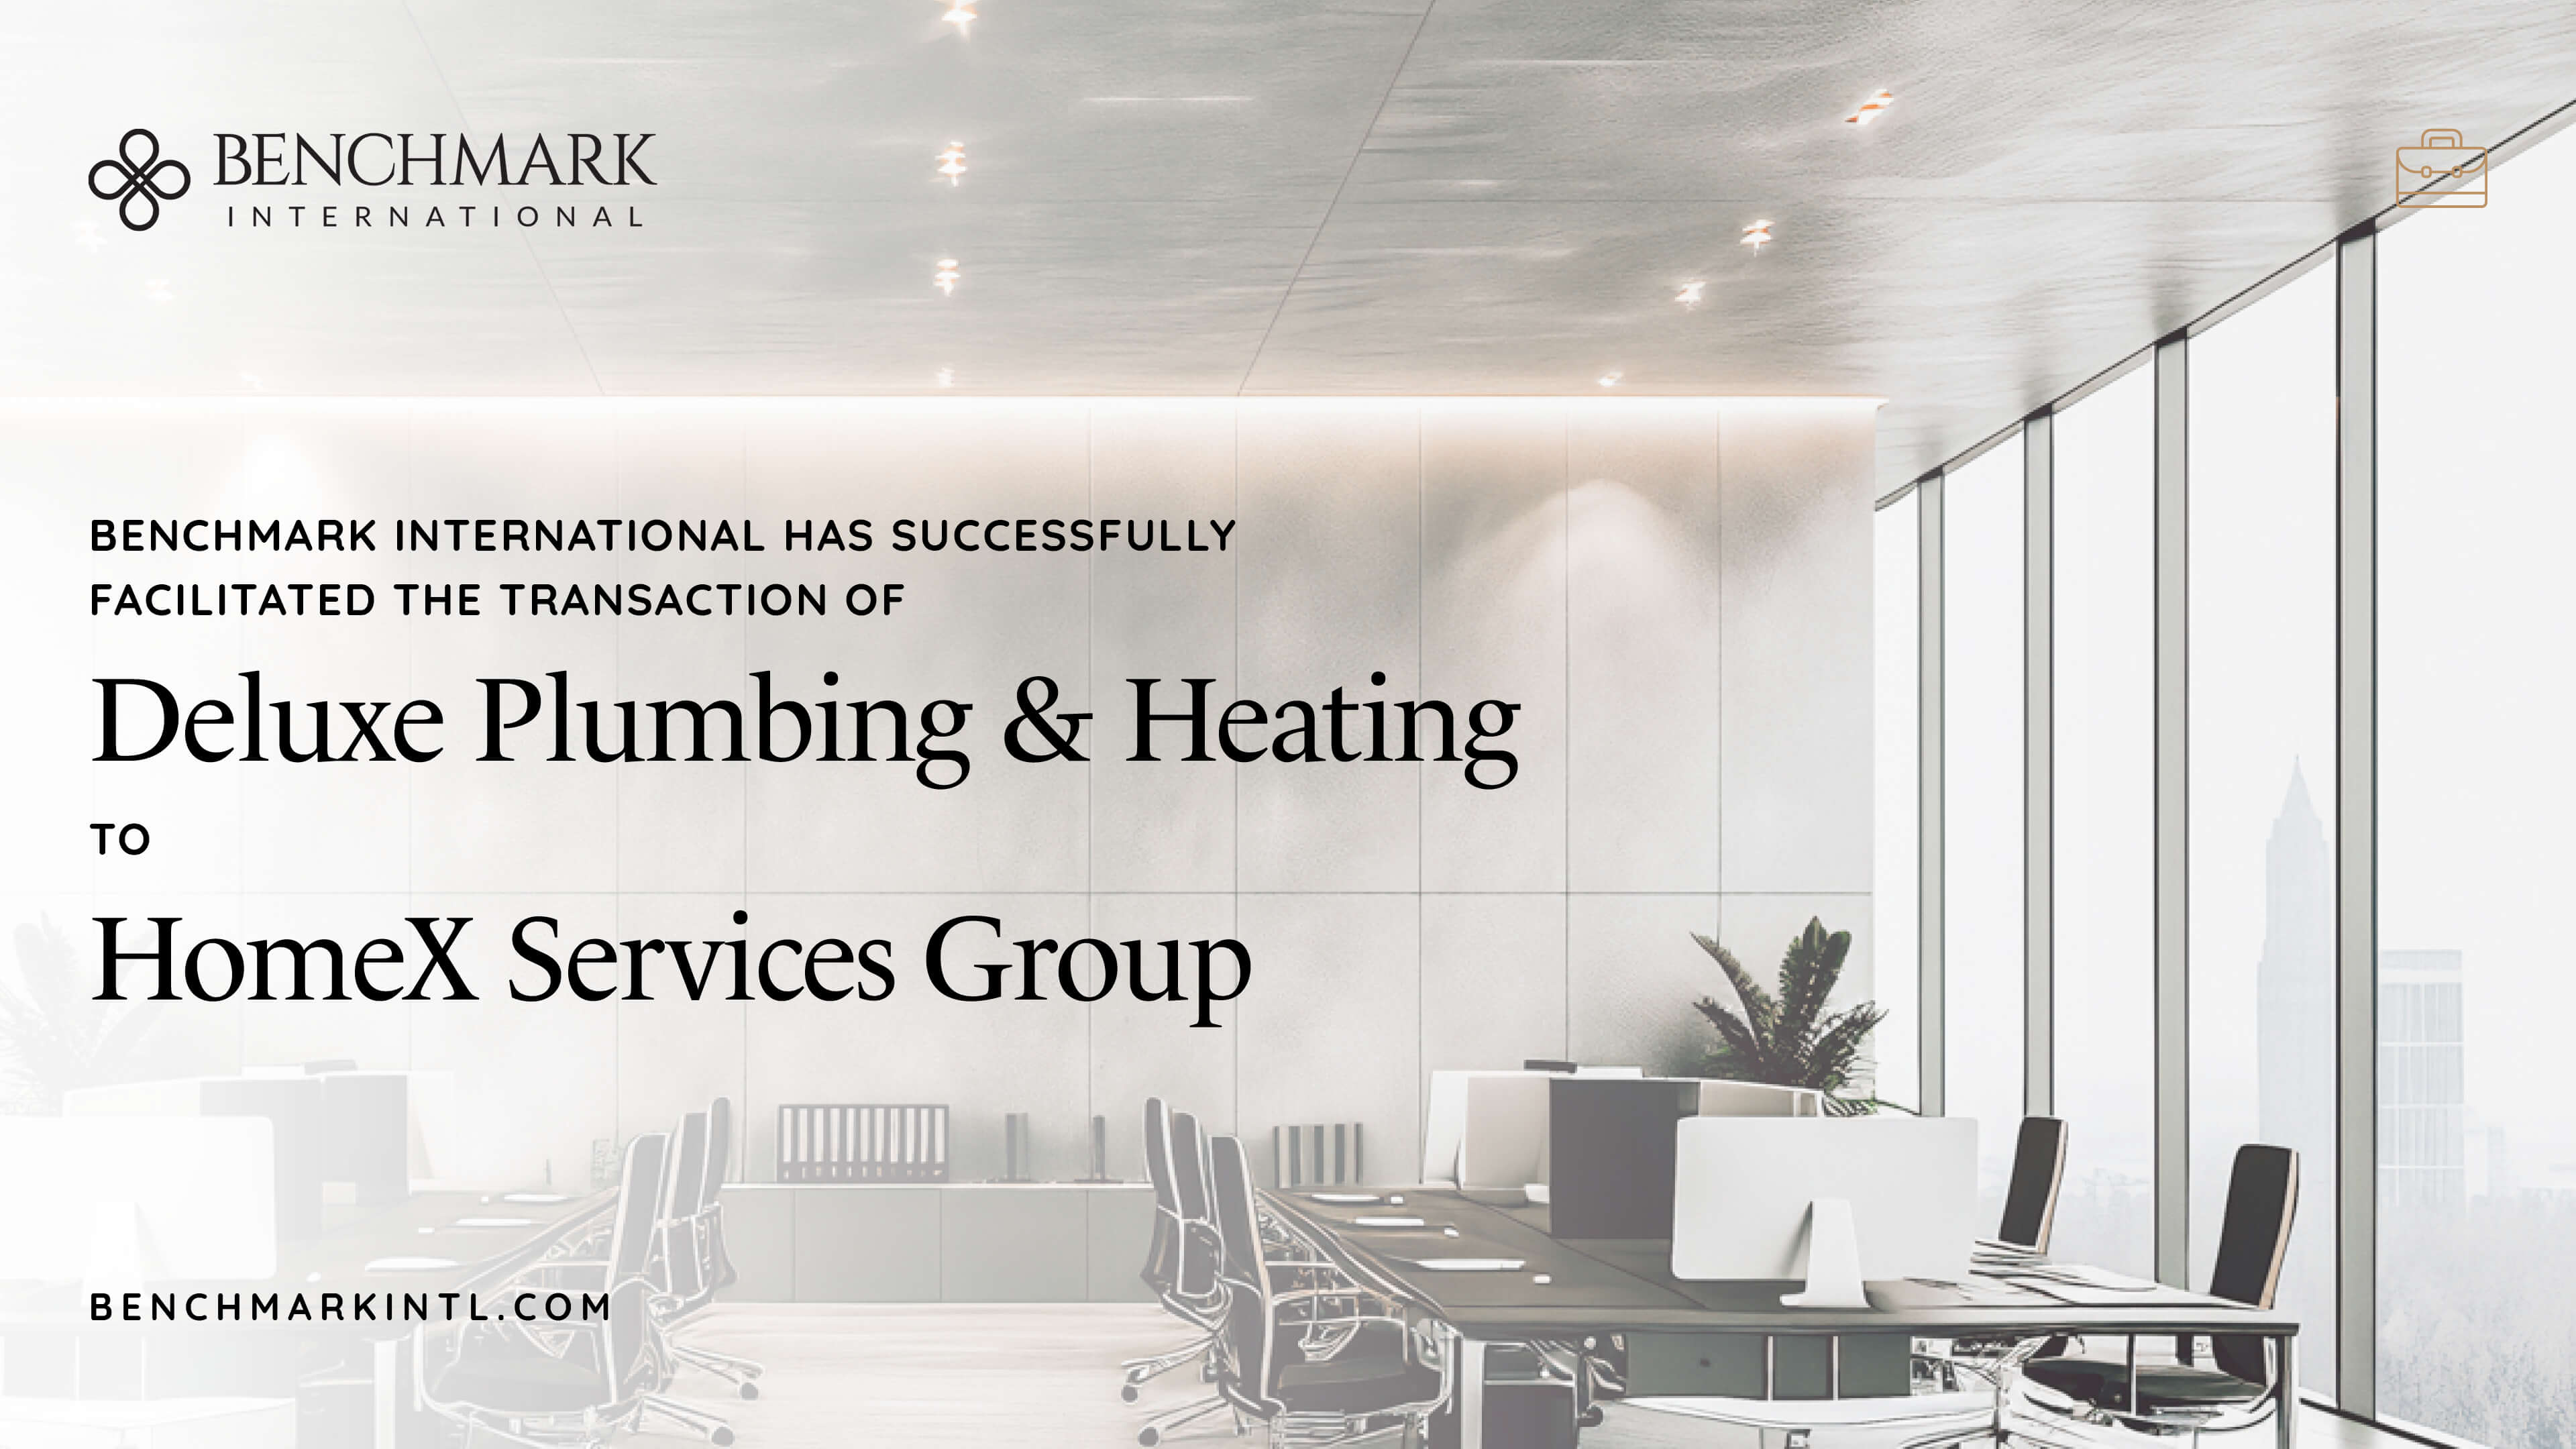 Benchmark International Facilitated The Transaction Of Deluxe Plumbing & Heating To Homex Services Group